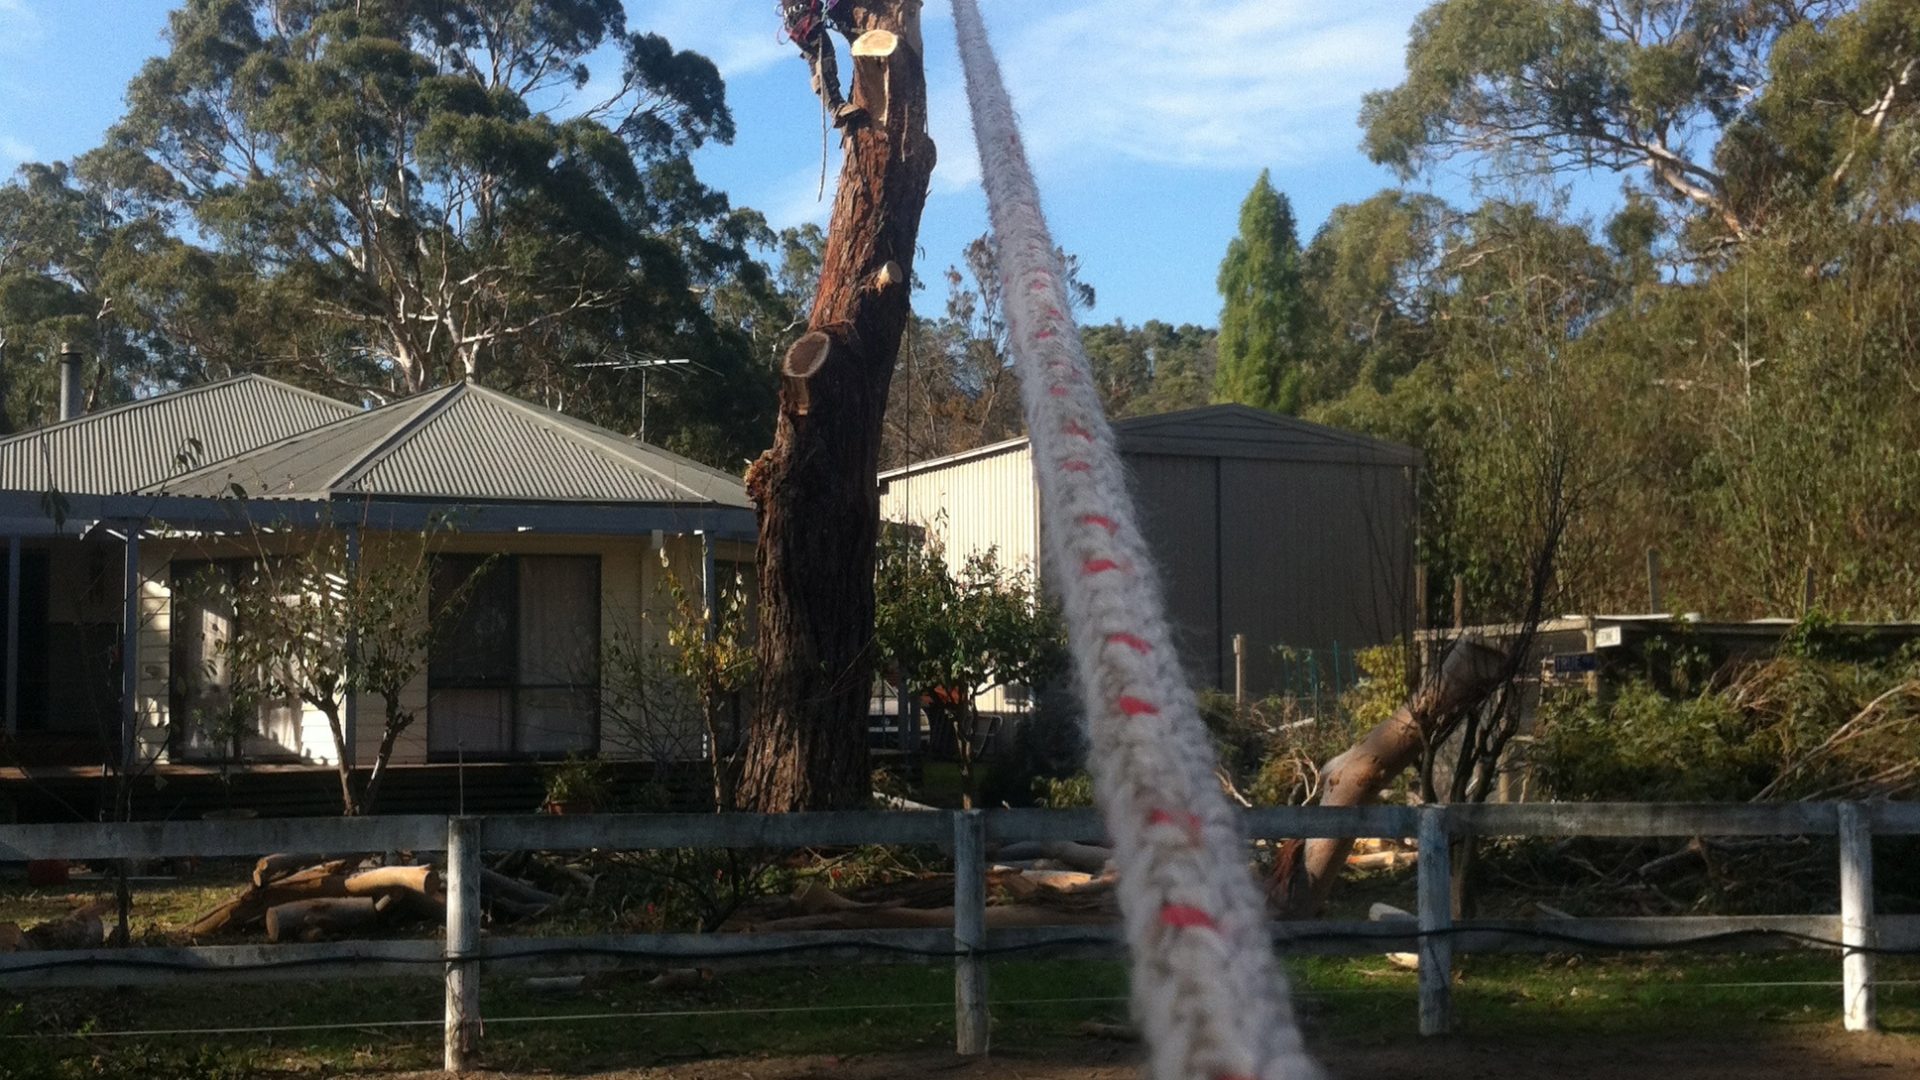 Baxter Tree Pruning - Lopping - Tree Removal Service